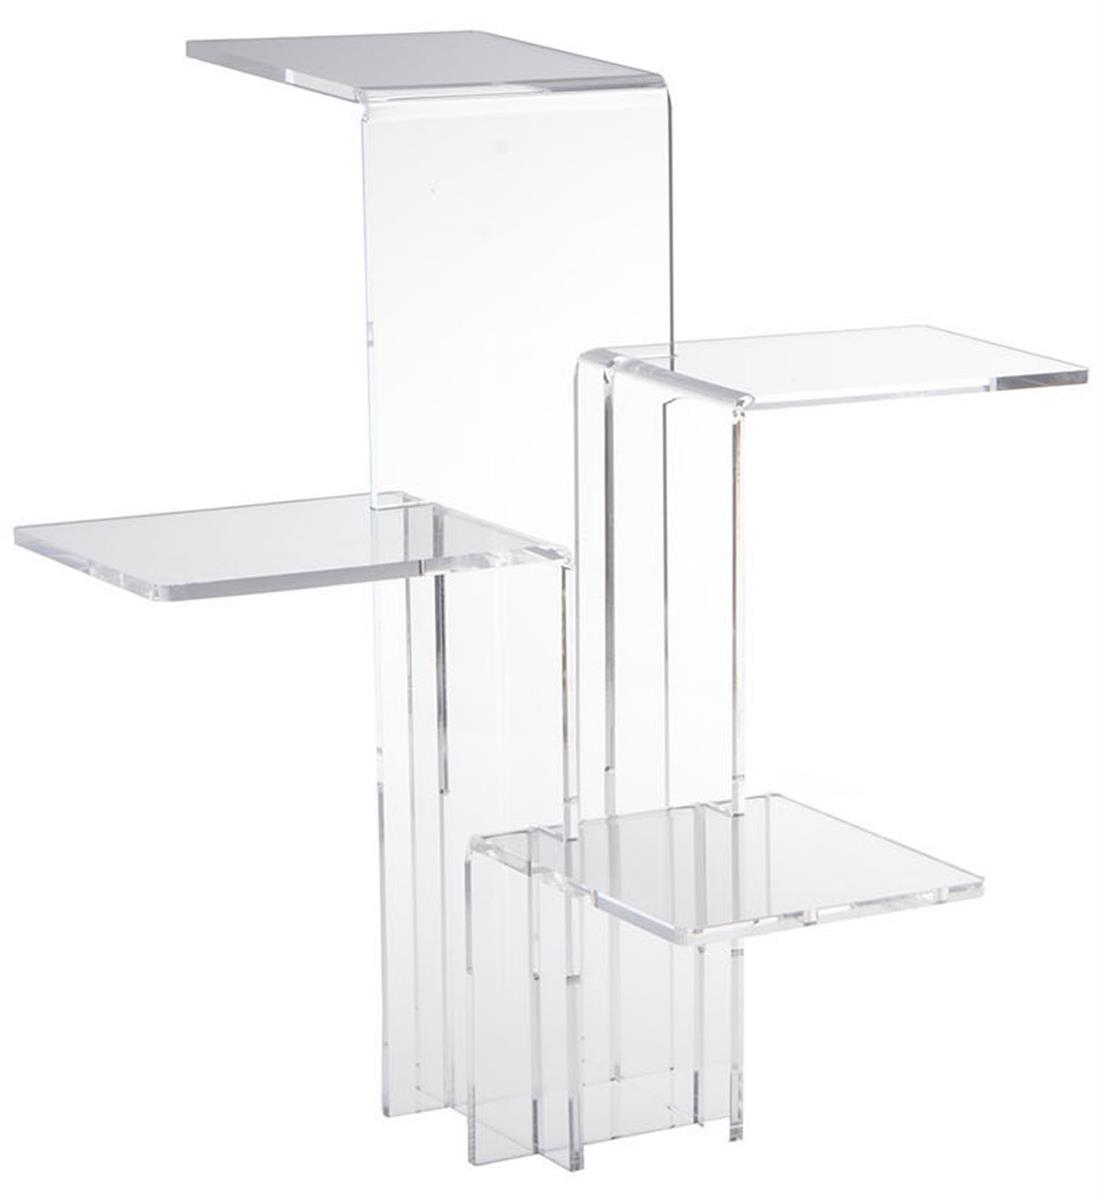 Plastic Risers Display Stand Pedestal *#4" x 4" x 4" Wholesale Clear Acrylic 